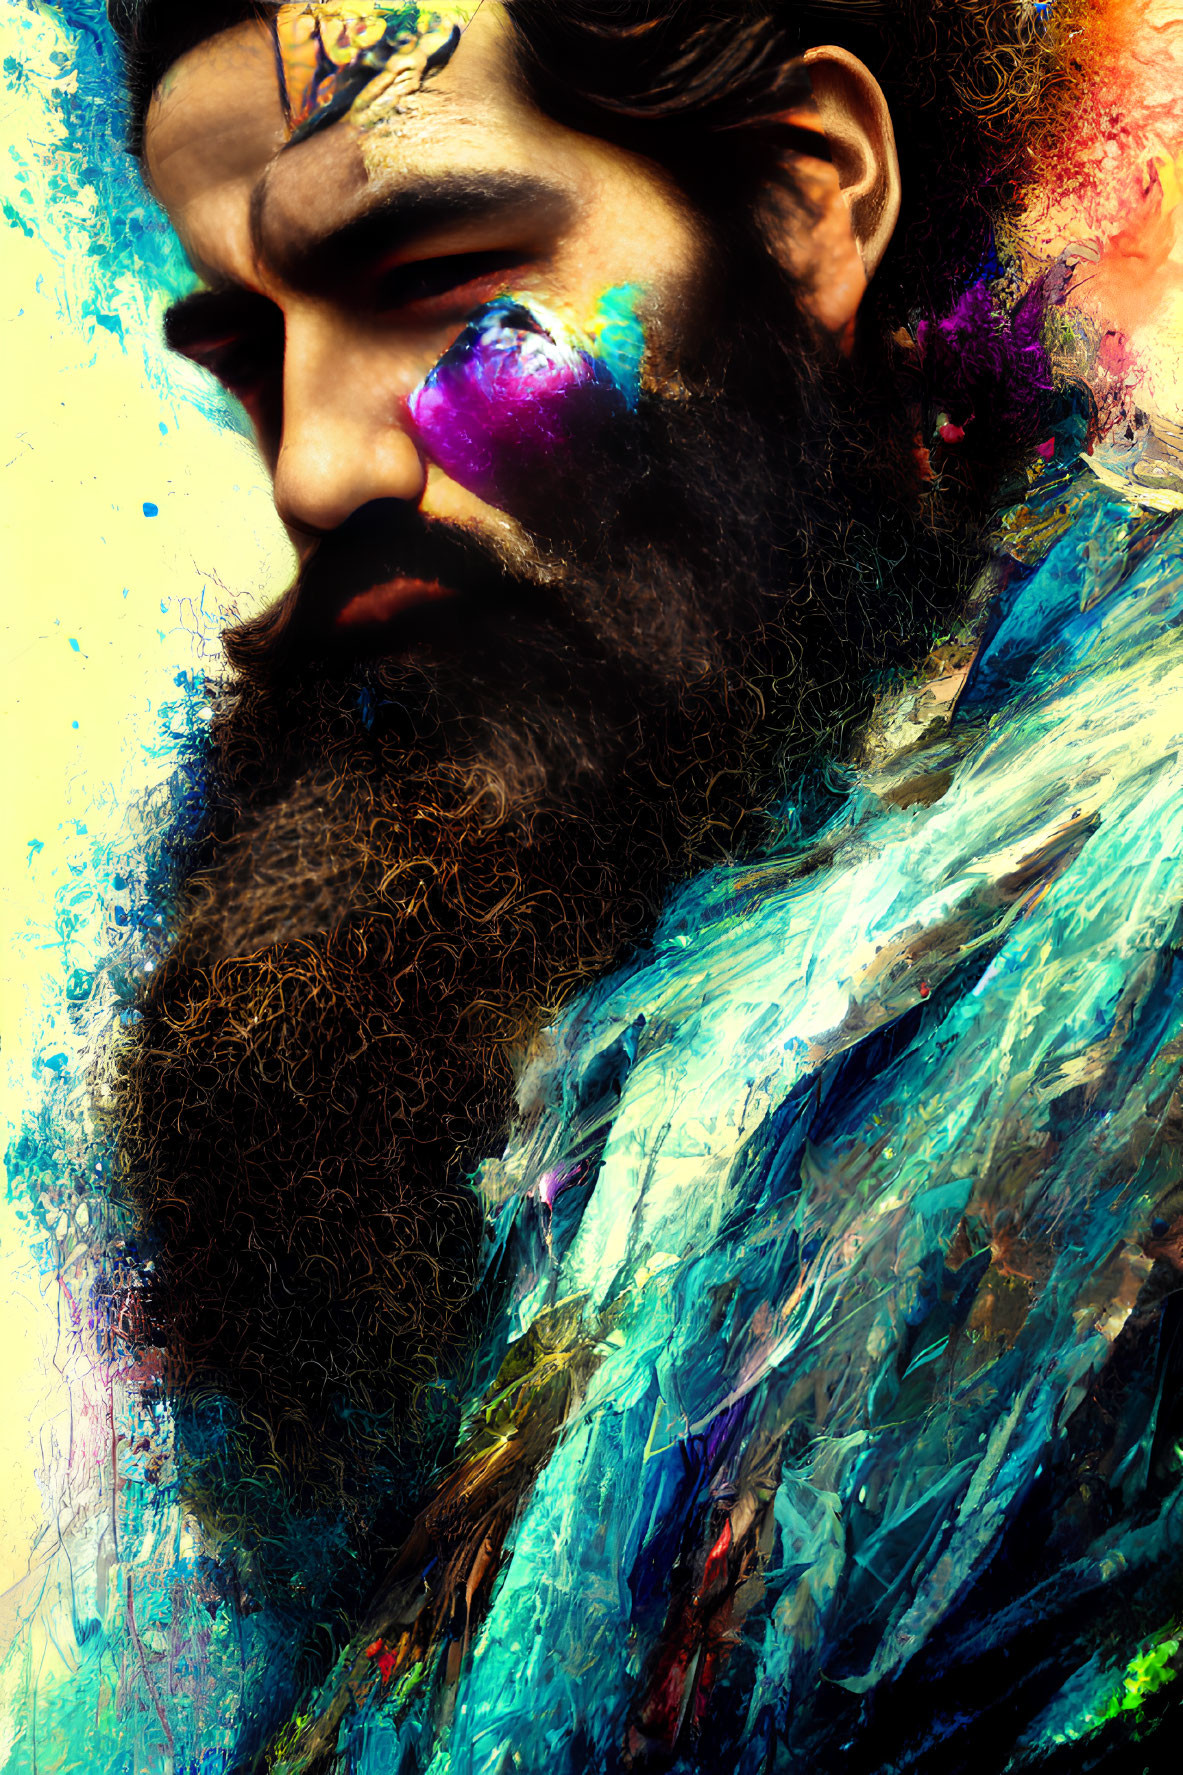 Colorful Abstract Artwork Featuring Bearded Man